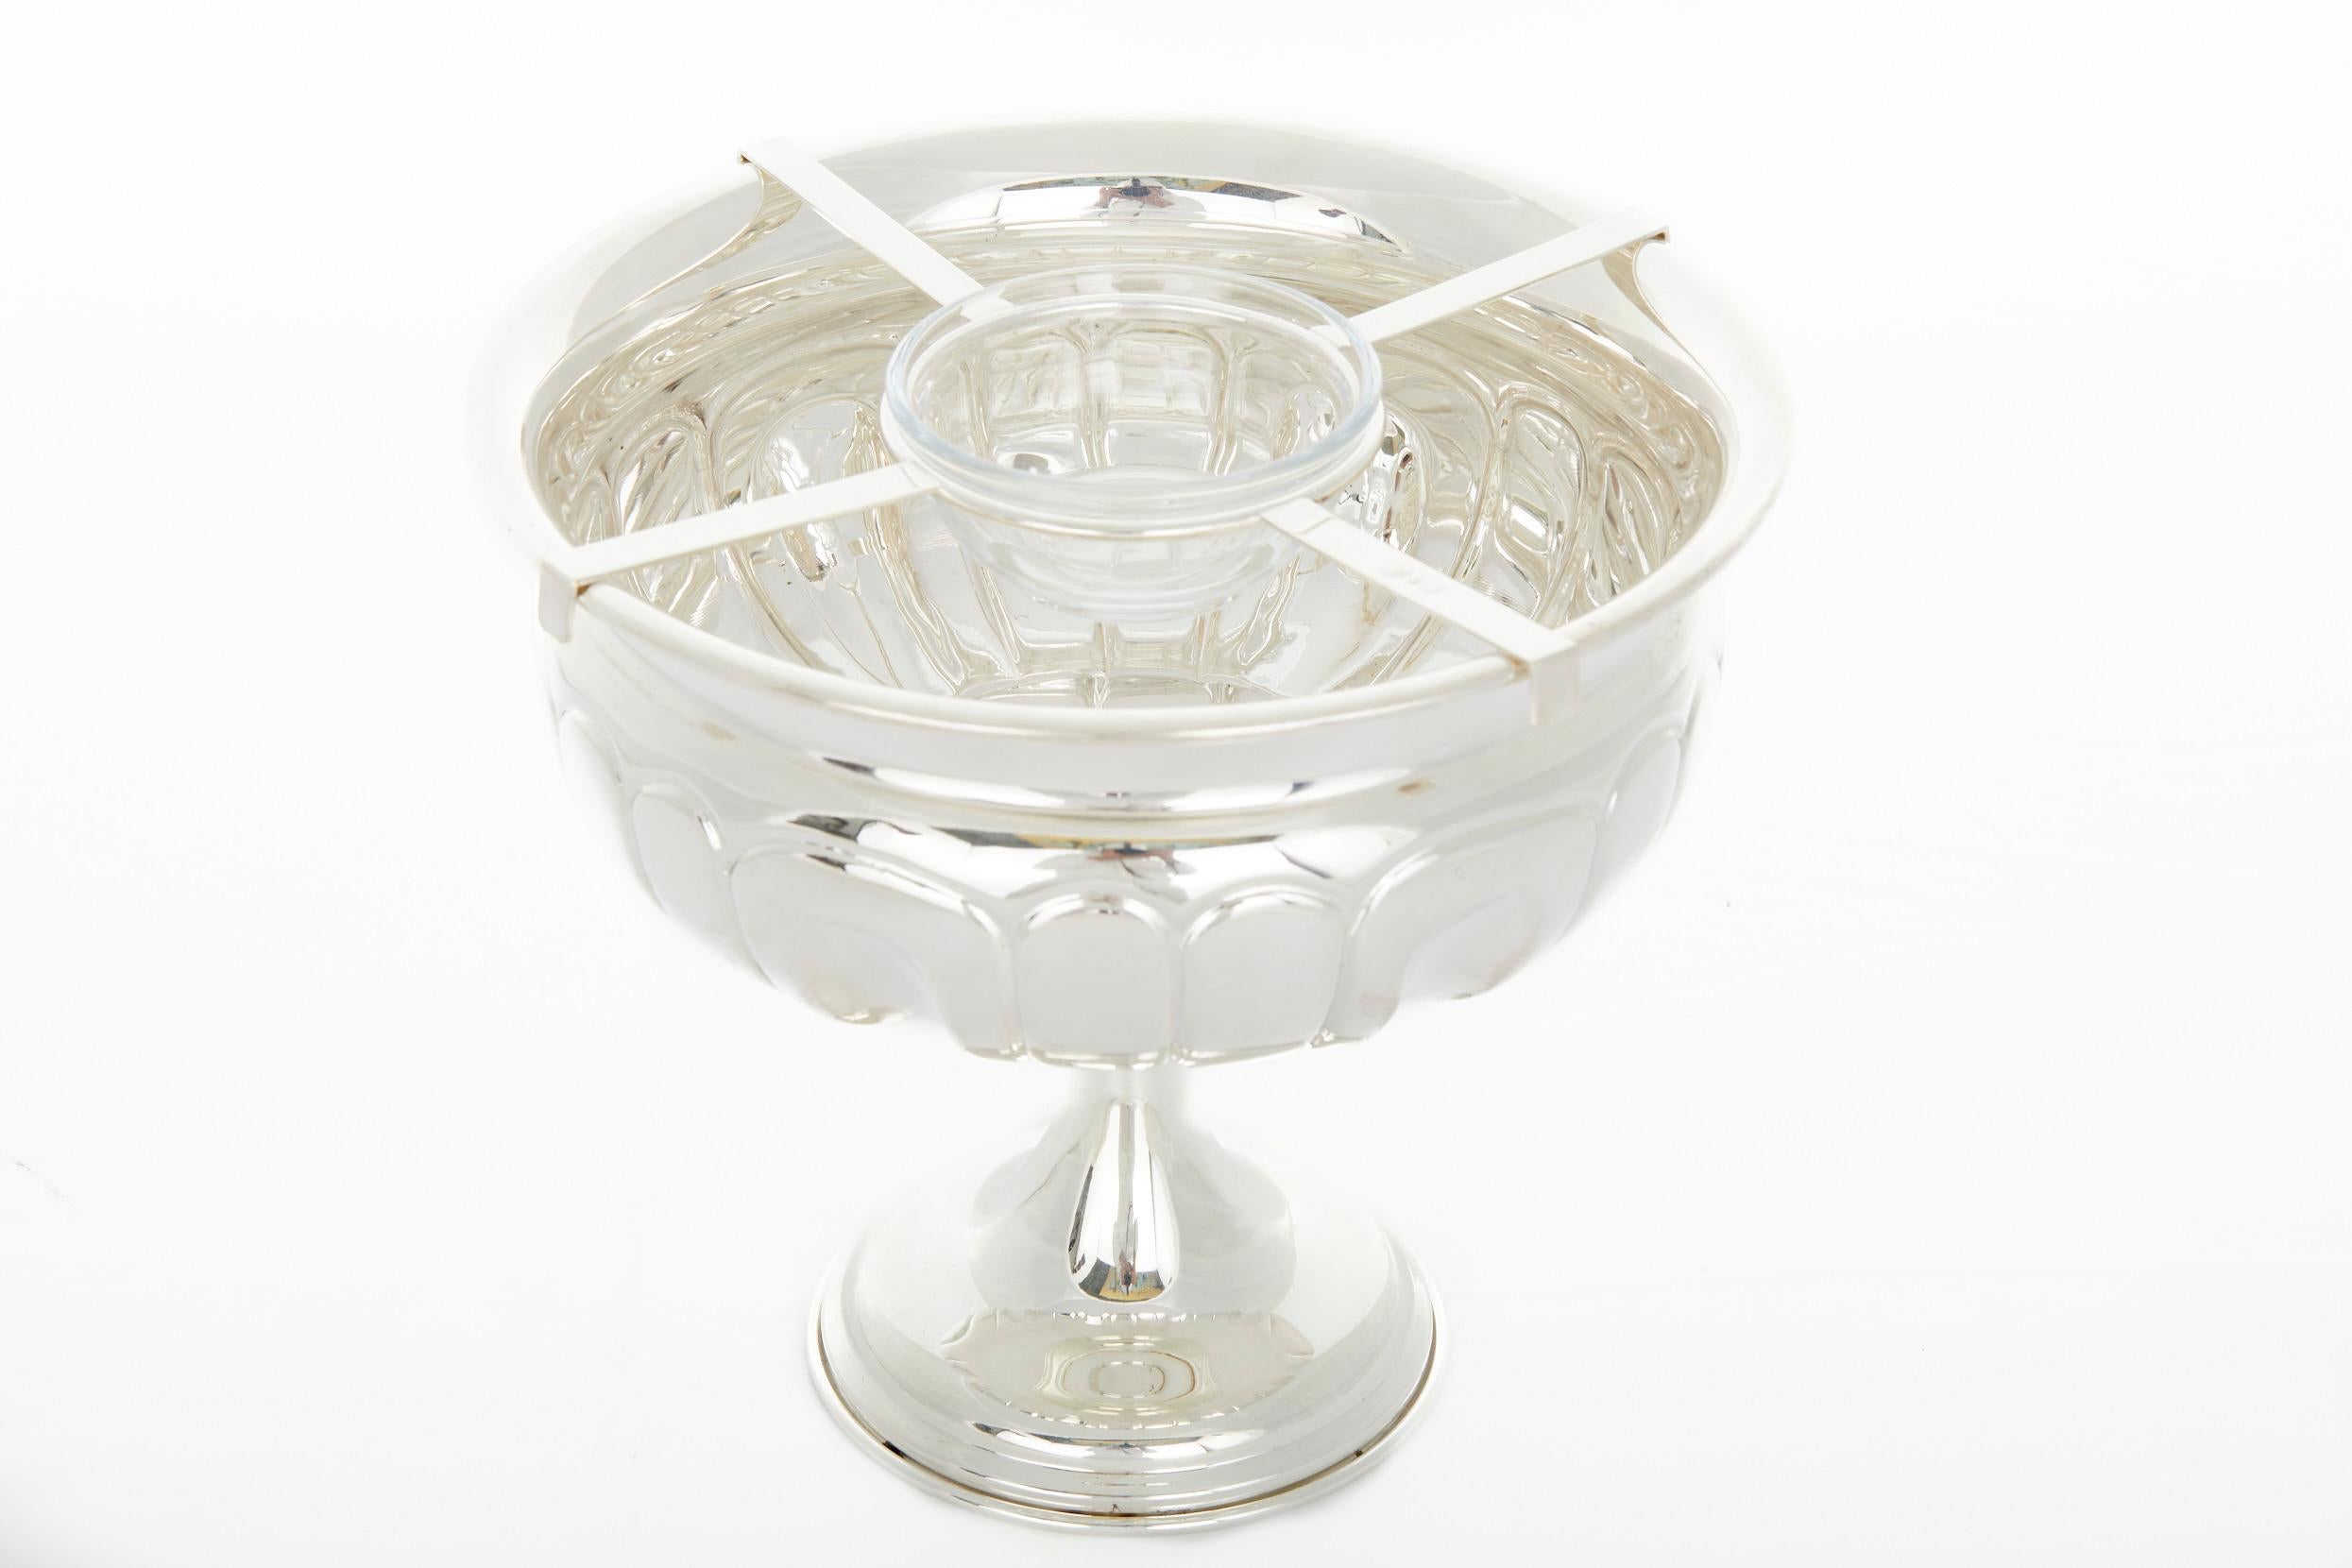 Beautiful Hand made Silver Plated three piece barware / tableware caviar service . The caviar piece features a round footed base with exterior design details and glass caviar bowl . The piece is in great condition . Minor wear . Maker's mark